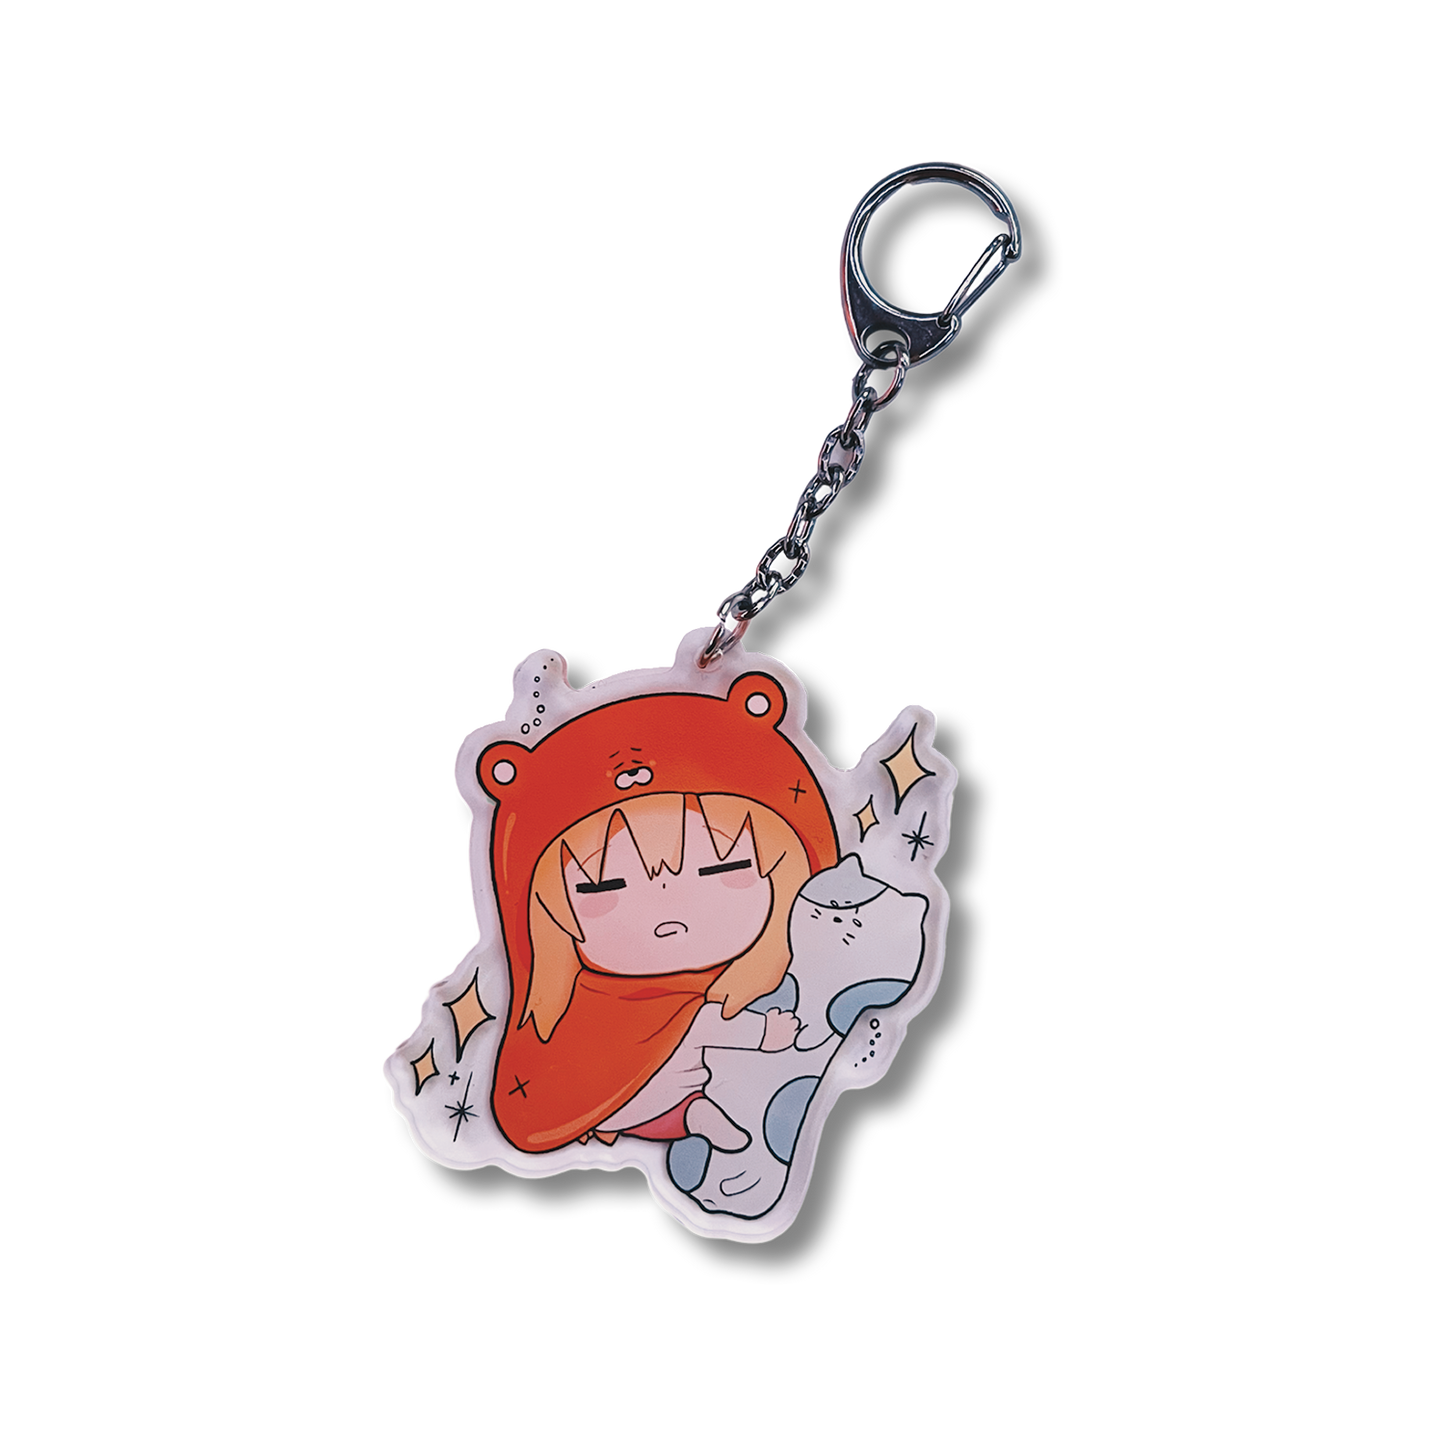 Sleeping Umaru Keychain design features Umaru from Himouto! Umaru-Chan sleeping with her long cat plushie and yellow sparkles on an acrylic keychain.